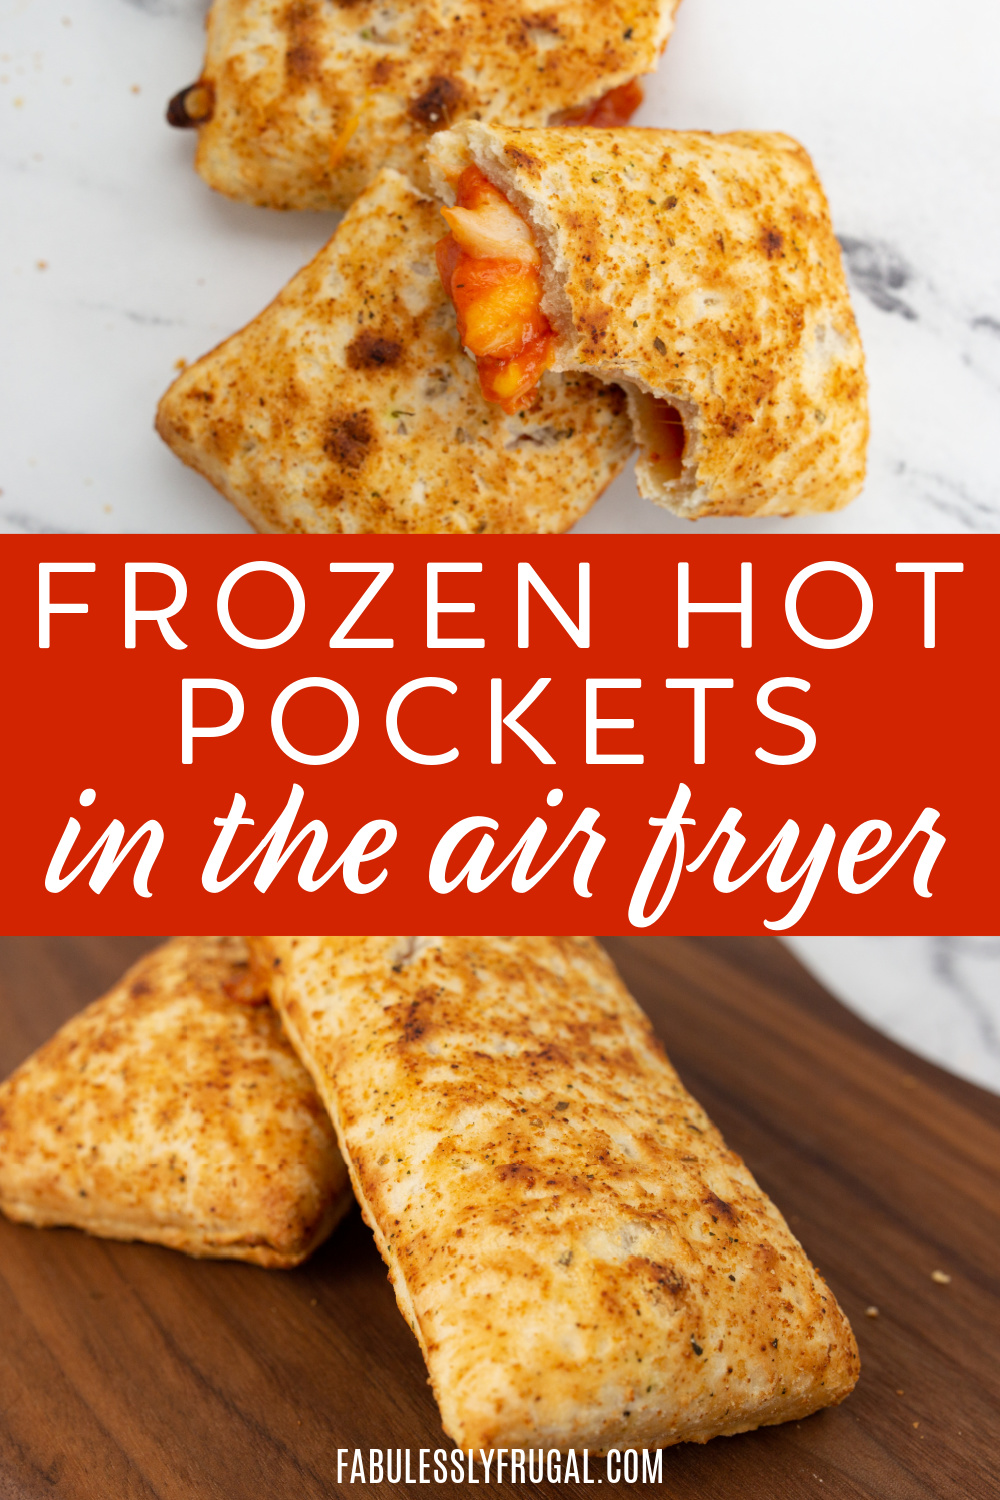 https://fabulesslyfrugal.com/wp-content/uploads/2023/03/how-to-make-frozen-hot-pockets-in-the-air-fryer-2.jpg